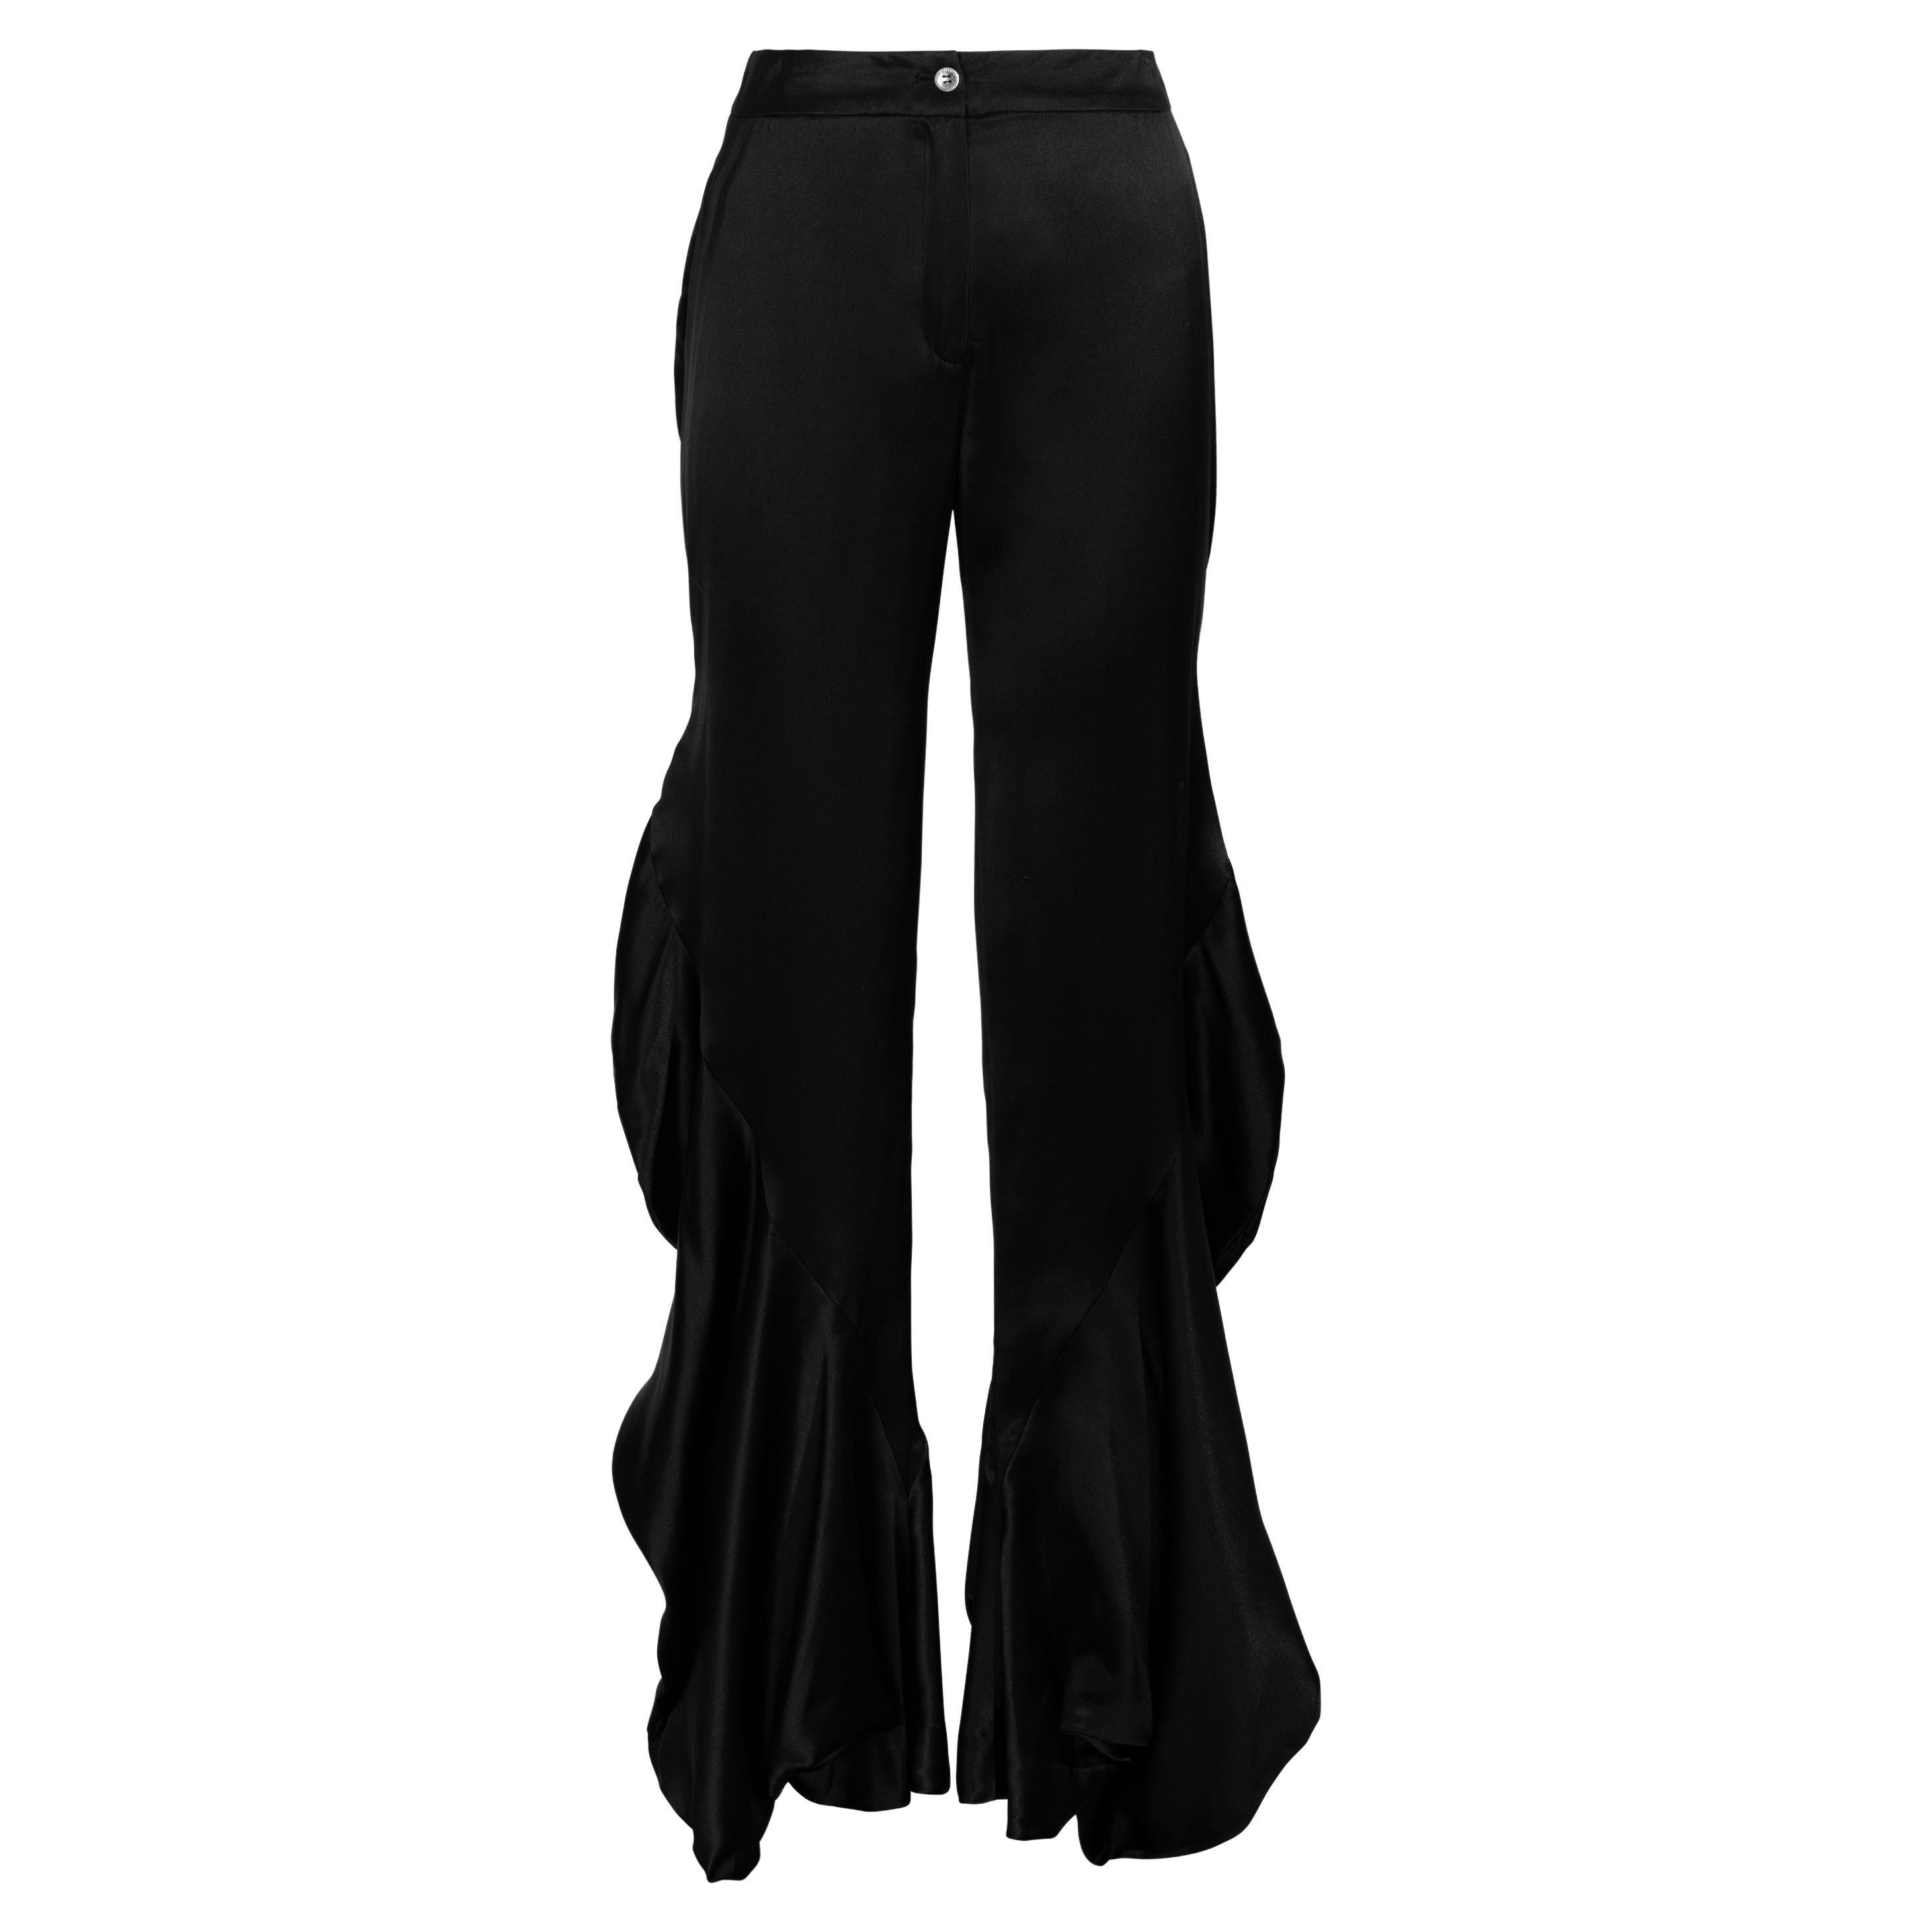 2000’s Christian Dior by John Galliano Silk Black Pants with Ruffle Sides